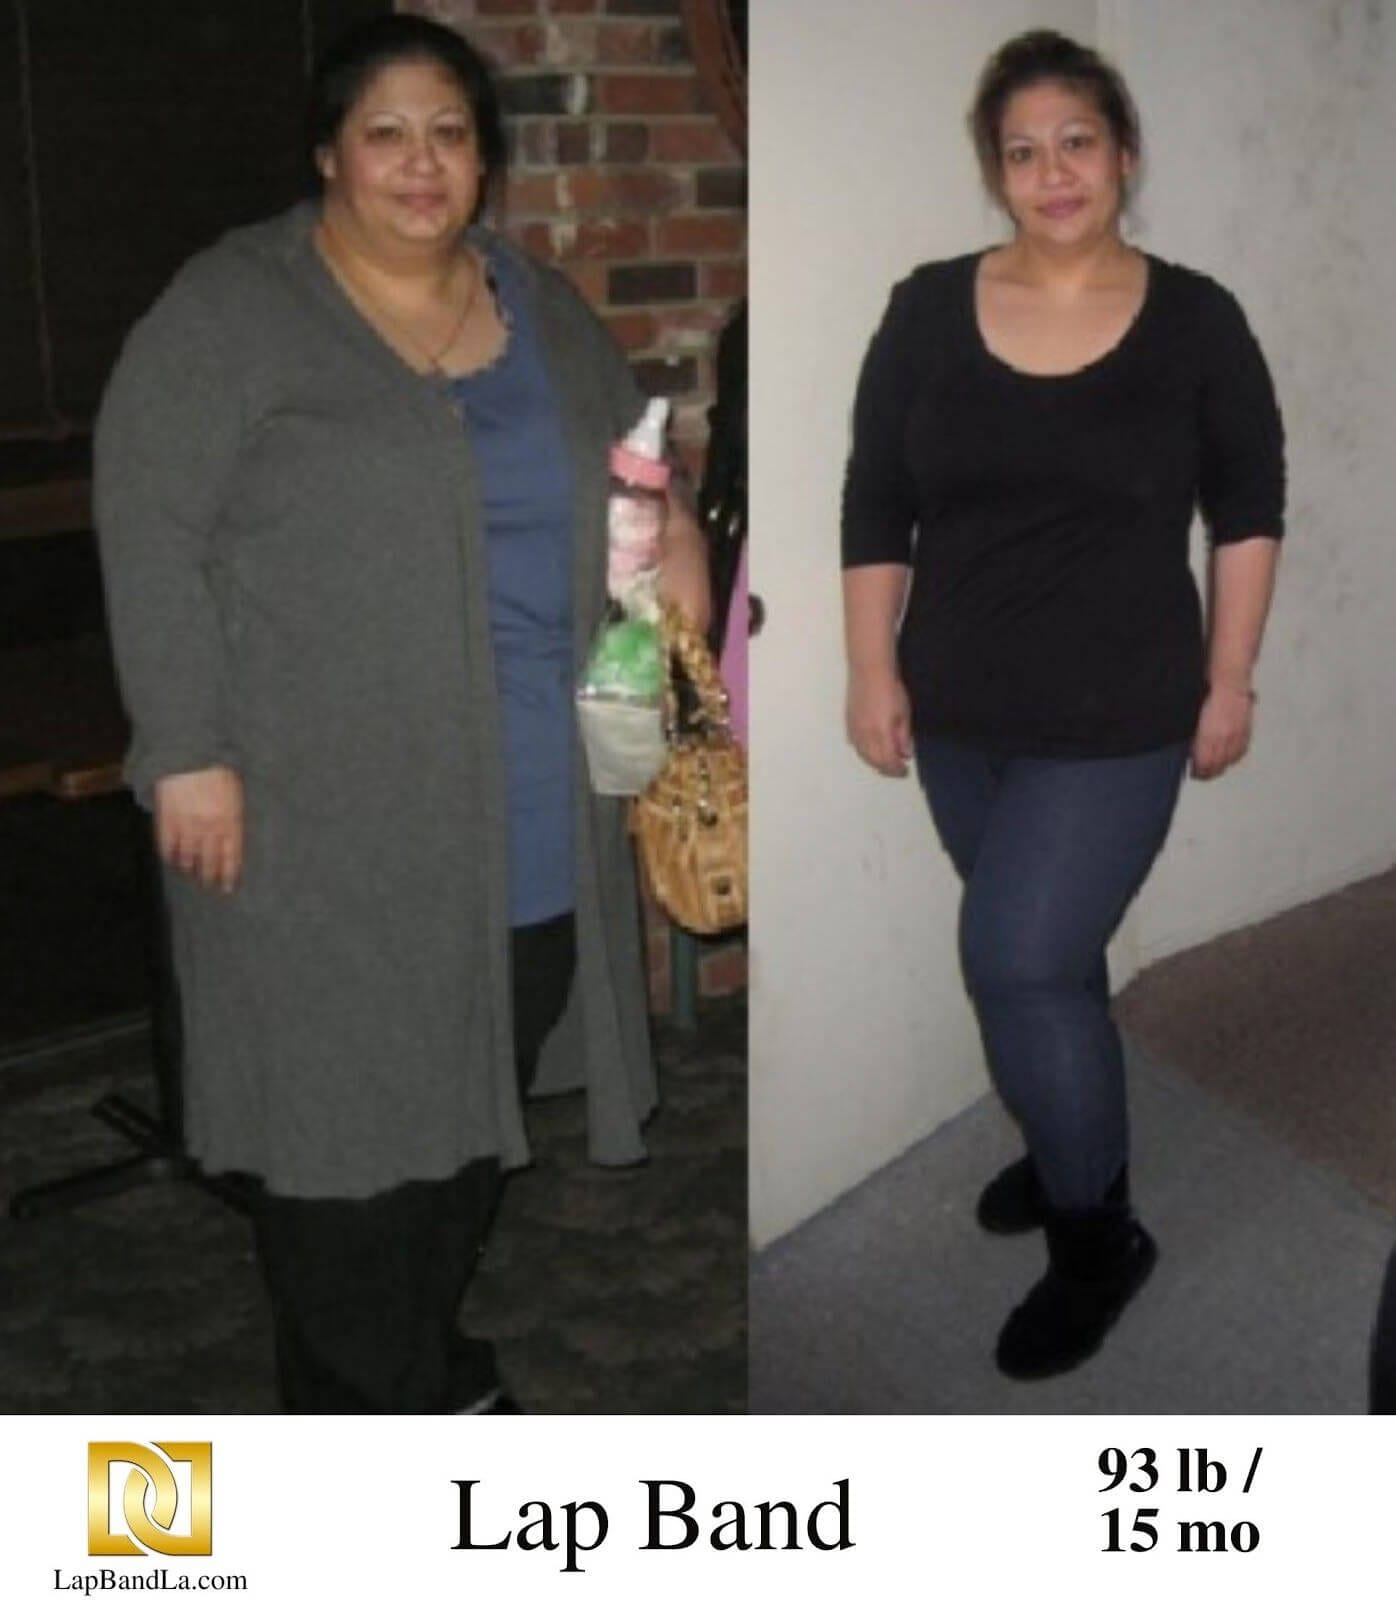 Anita S. - The Weight Loss Surgery Center Of Los Angeles